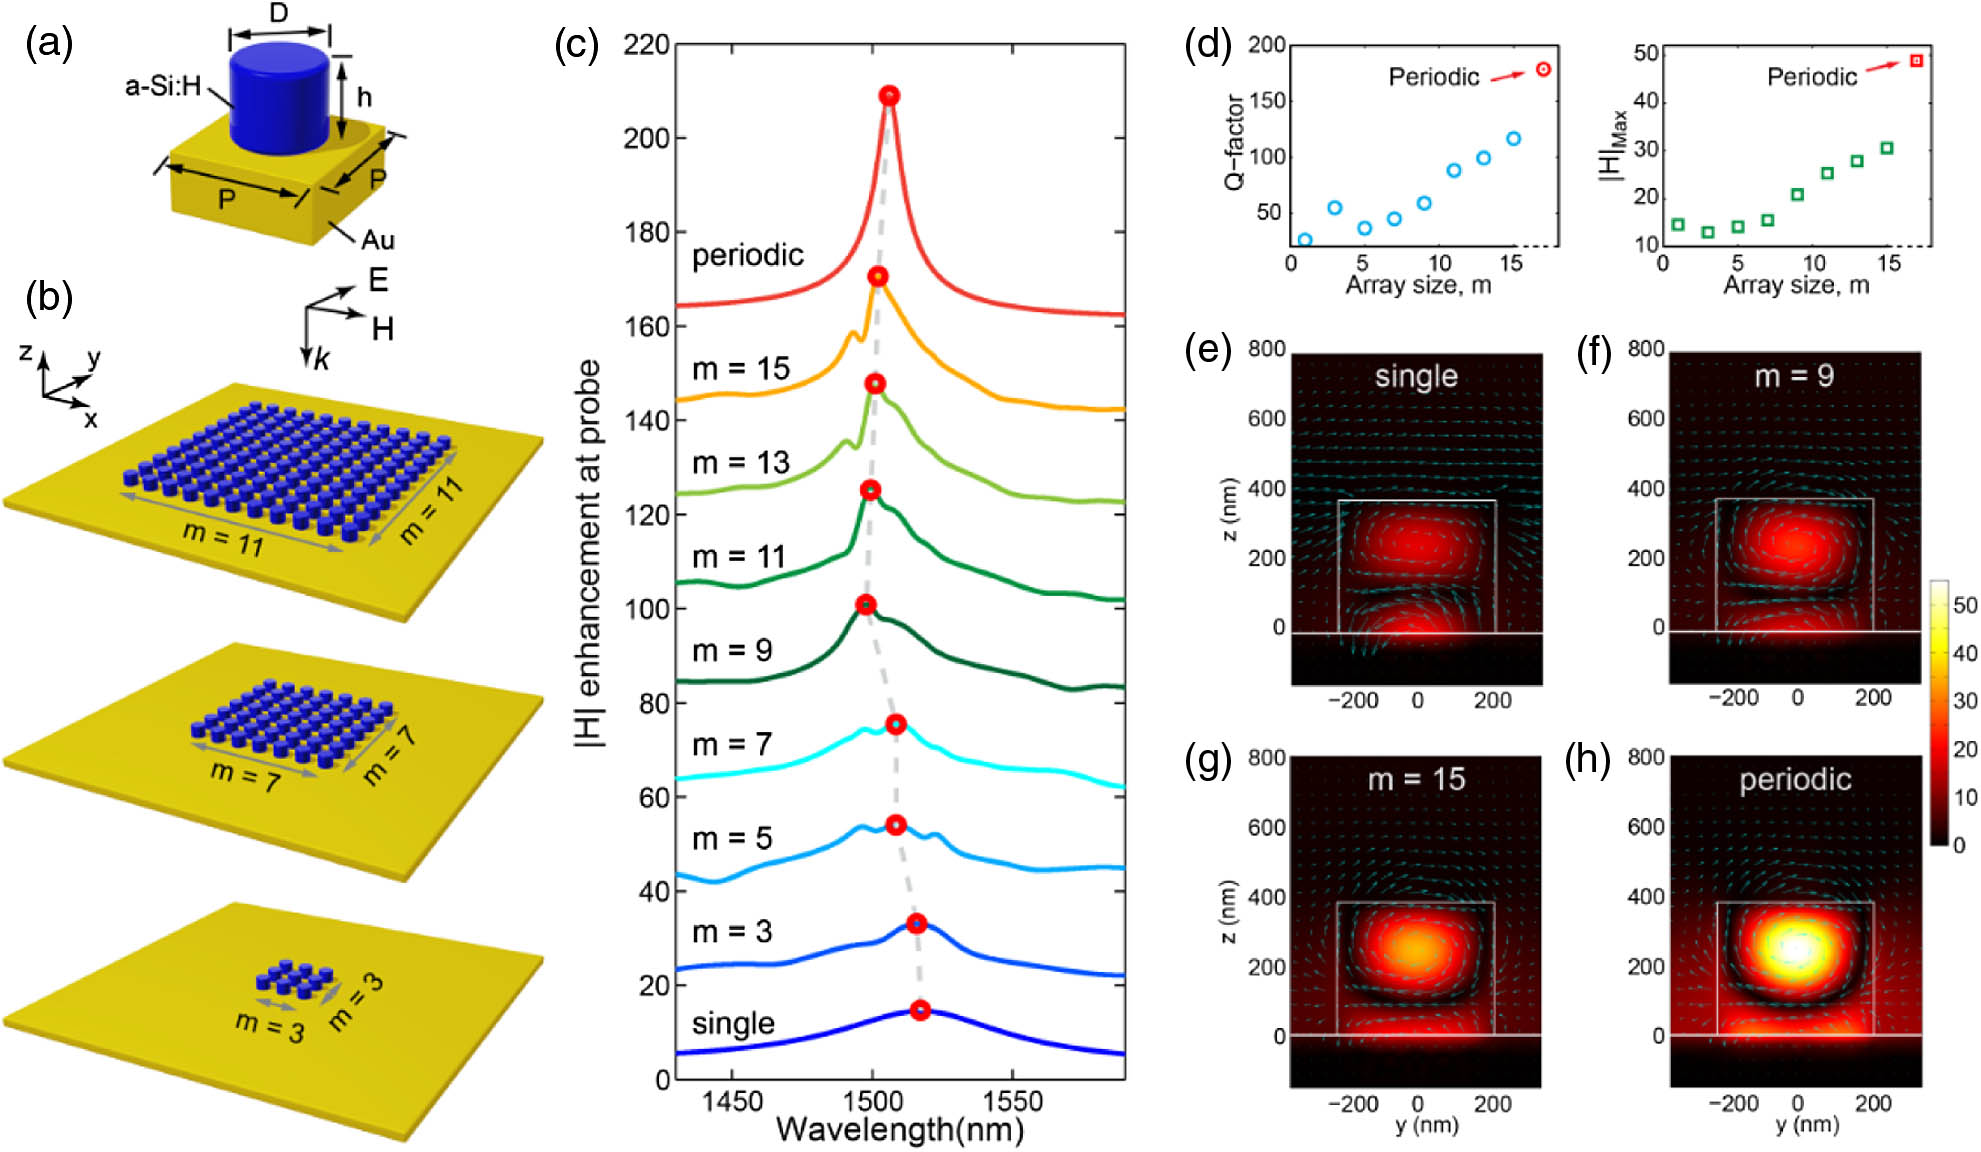 Meta-optics based on Si resonators on a plasmonic substrate. (a) Illustration of a unit cell of the metasurface consisting of an array of a-Si:H nanodisks on top of an optically thick Au ground plane. Geometrical parameters: P=720 nm, D=450 nm, and h=385 nm. (b) Schematic of the proposed meta-optical systems with finite array size, in which square arrays having m×ma-Si:H nanodisk elements are located on top of an infinite Au substrate. (c) Calculated magnetic field (|H|) obtained from a magnetic probe located at the center of the central resonator for a series of array sizes used in numerical simulations. The gray dashed line is used to guide the eye. (d) Q-factor and the maximum enhancement factor |H|max as functions of the array size. The corresponding values in the periodic case are illustrated as well. (e)–(h) Calculated magnetic field and electric field vector distribution in the y–z plane, in the case of m=1, 9, and 15 as well as the periodic structure at the peak frequency identified in (c).